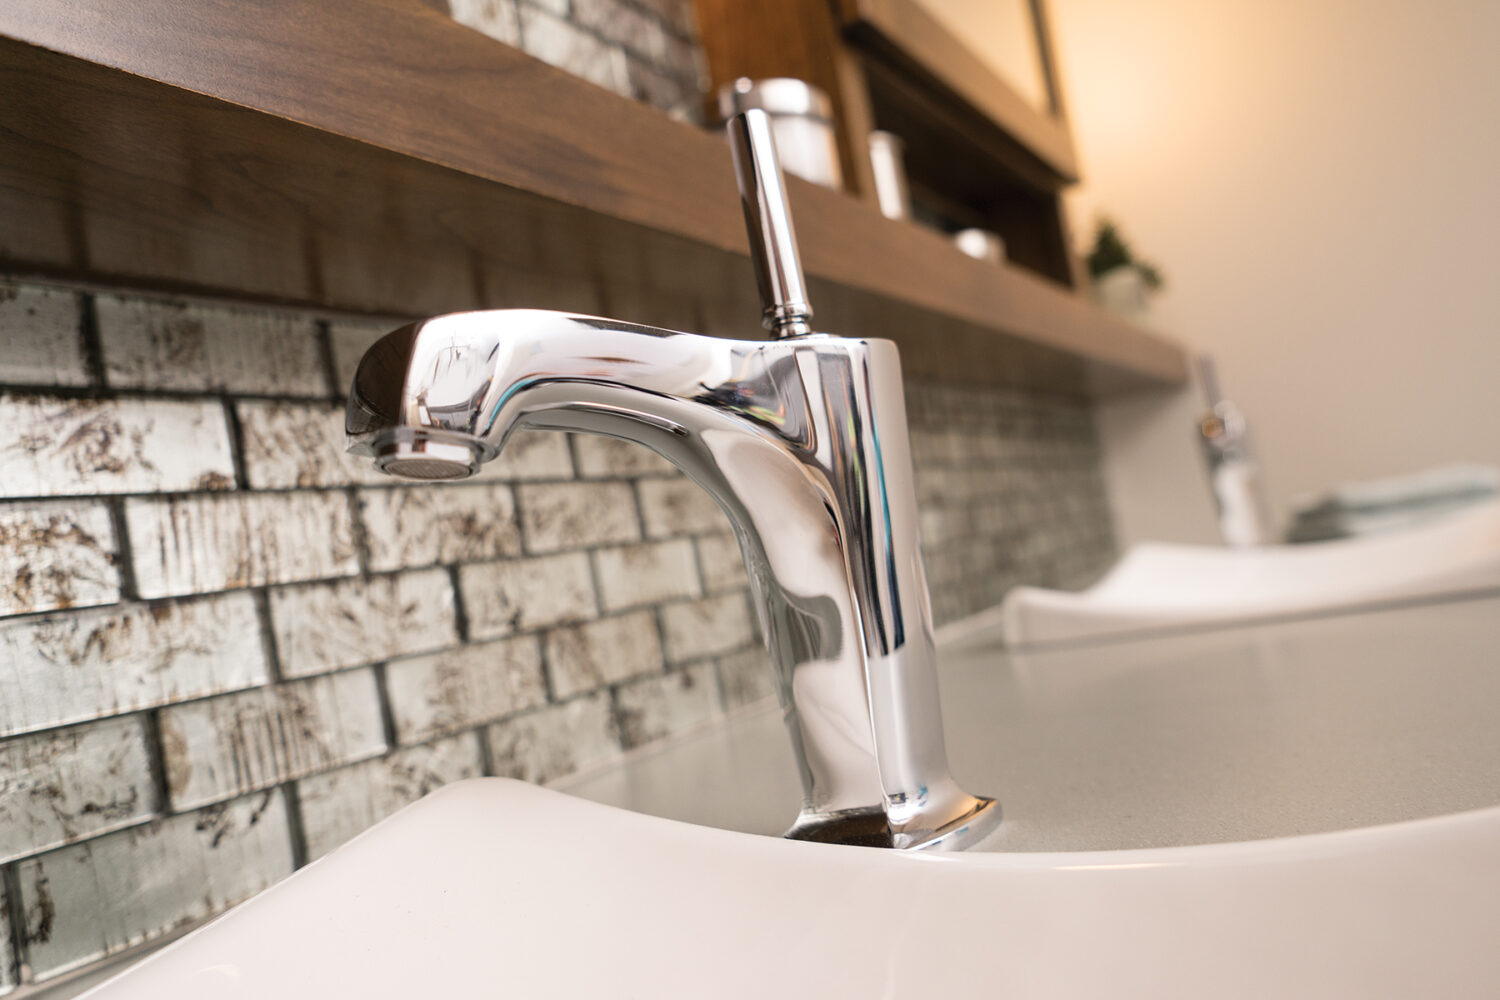 A modern bathroom faucet on a floating vanity cabinet by Dura Supreme Cabinetry.